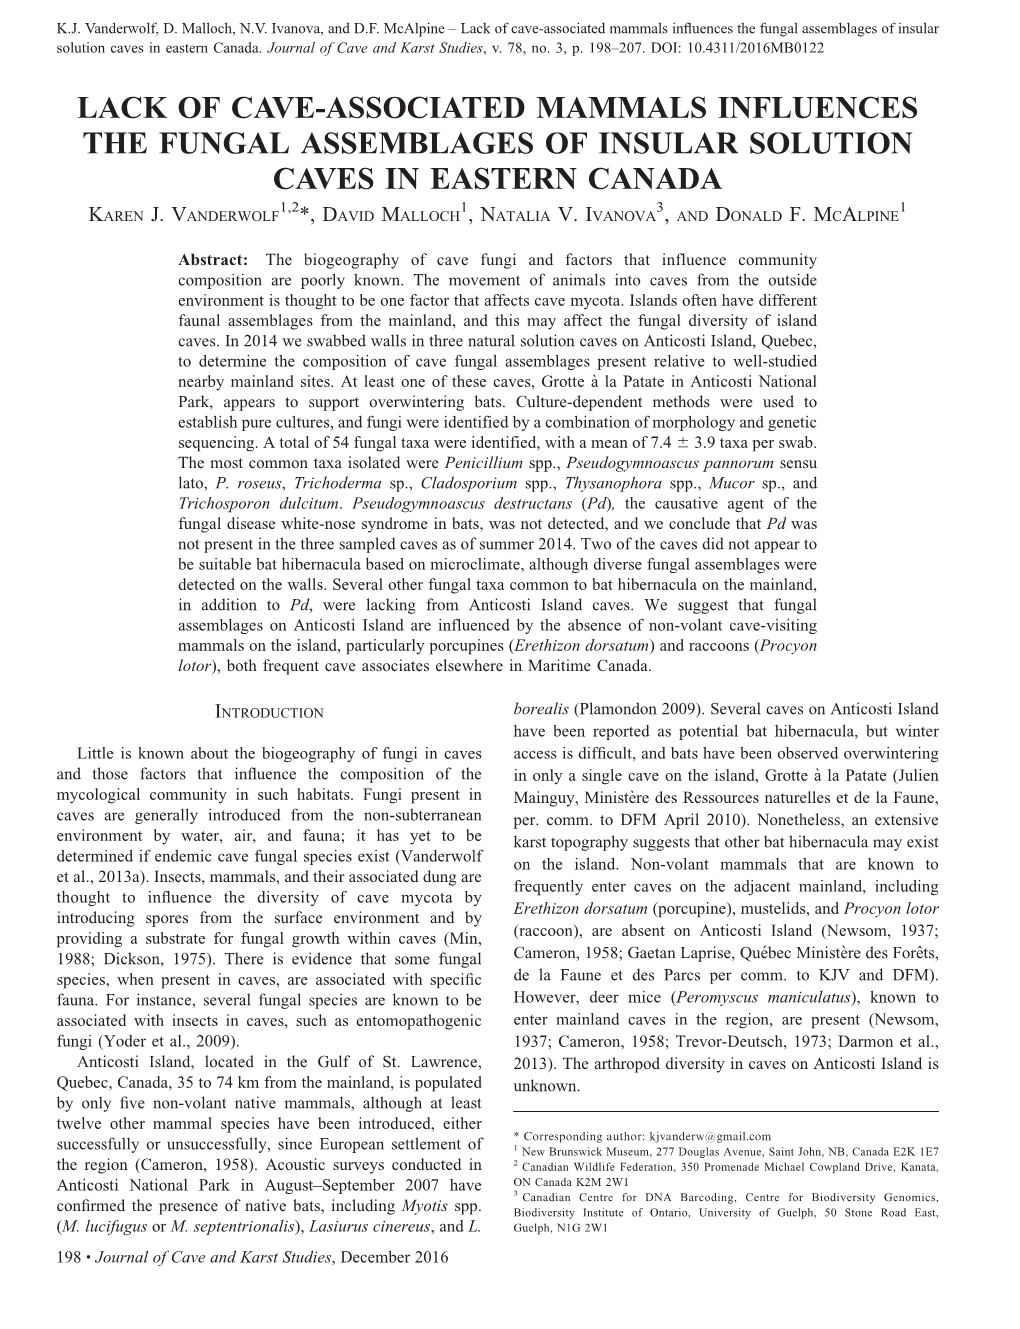 Lack of Cave-Associated Mammals Influences the Fungal Assemblages of Insular Solution Caves in Eastern Canada 1,2 1 3 1 Karen J